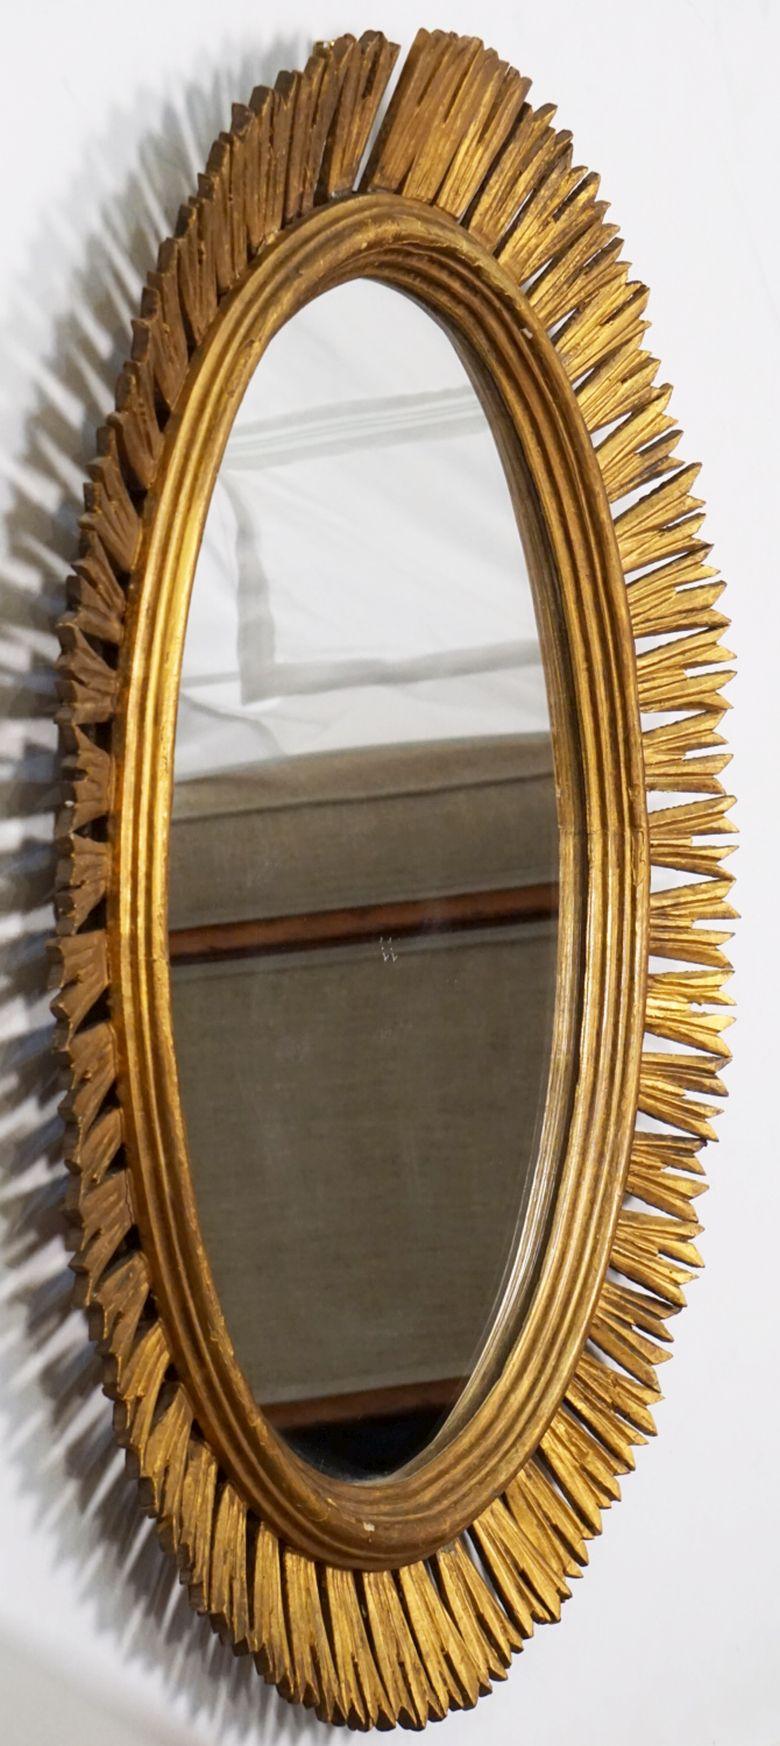 A fine large Spanish gilt sunburst (or starburst) oval mirror featuring an ovoid or elliptical mirrored glass center in moulded frame surrounded by emanating rays.

Dimensions are H 31 1/2 inches x W 24 1/2 inches x D 2 1/4 inches